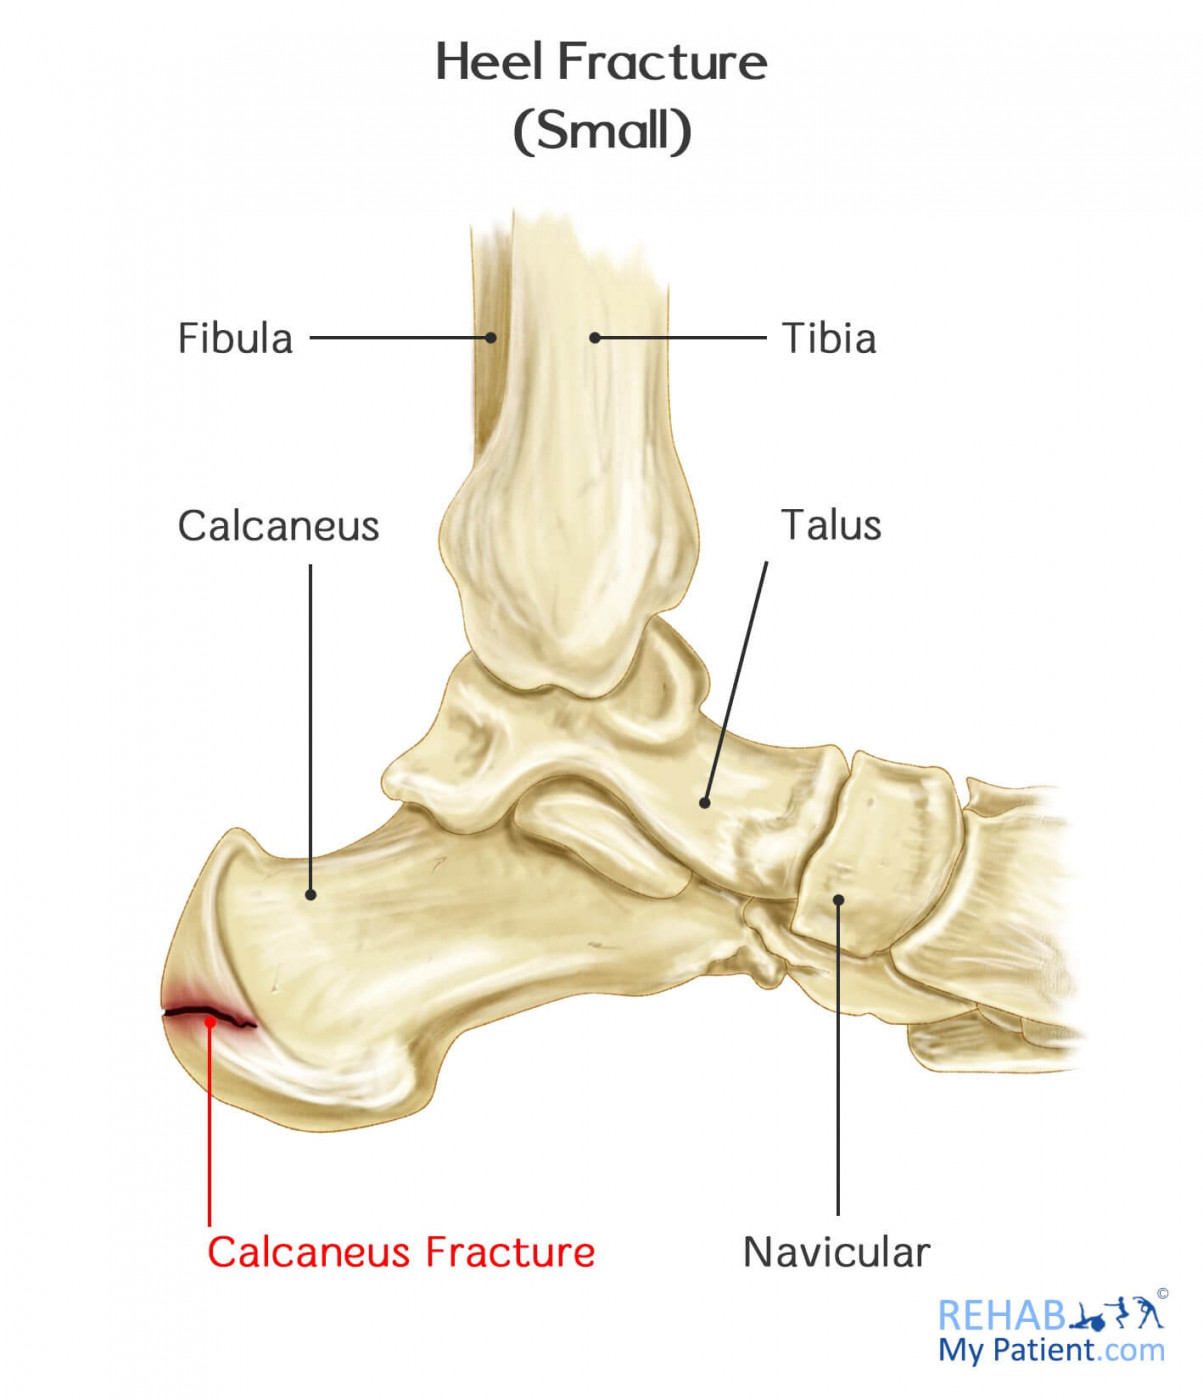 Achilles Tendon Tear - Symptoms and Treatment - OrthoInfo - AAOS